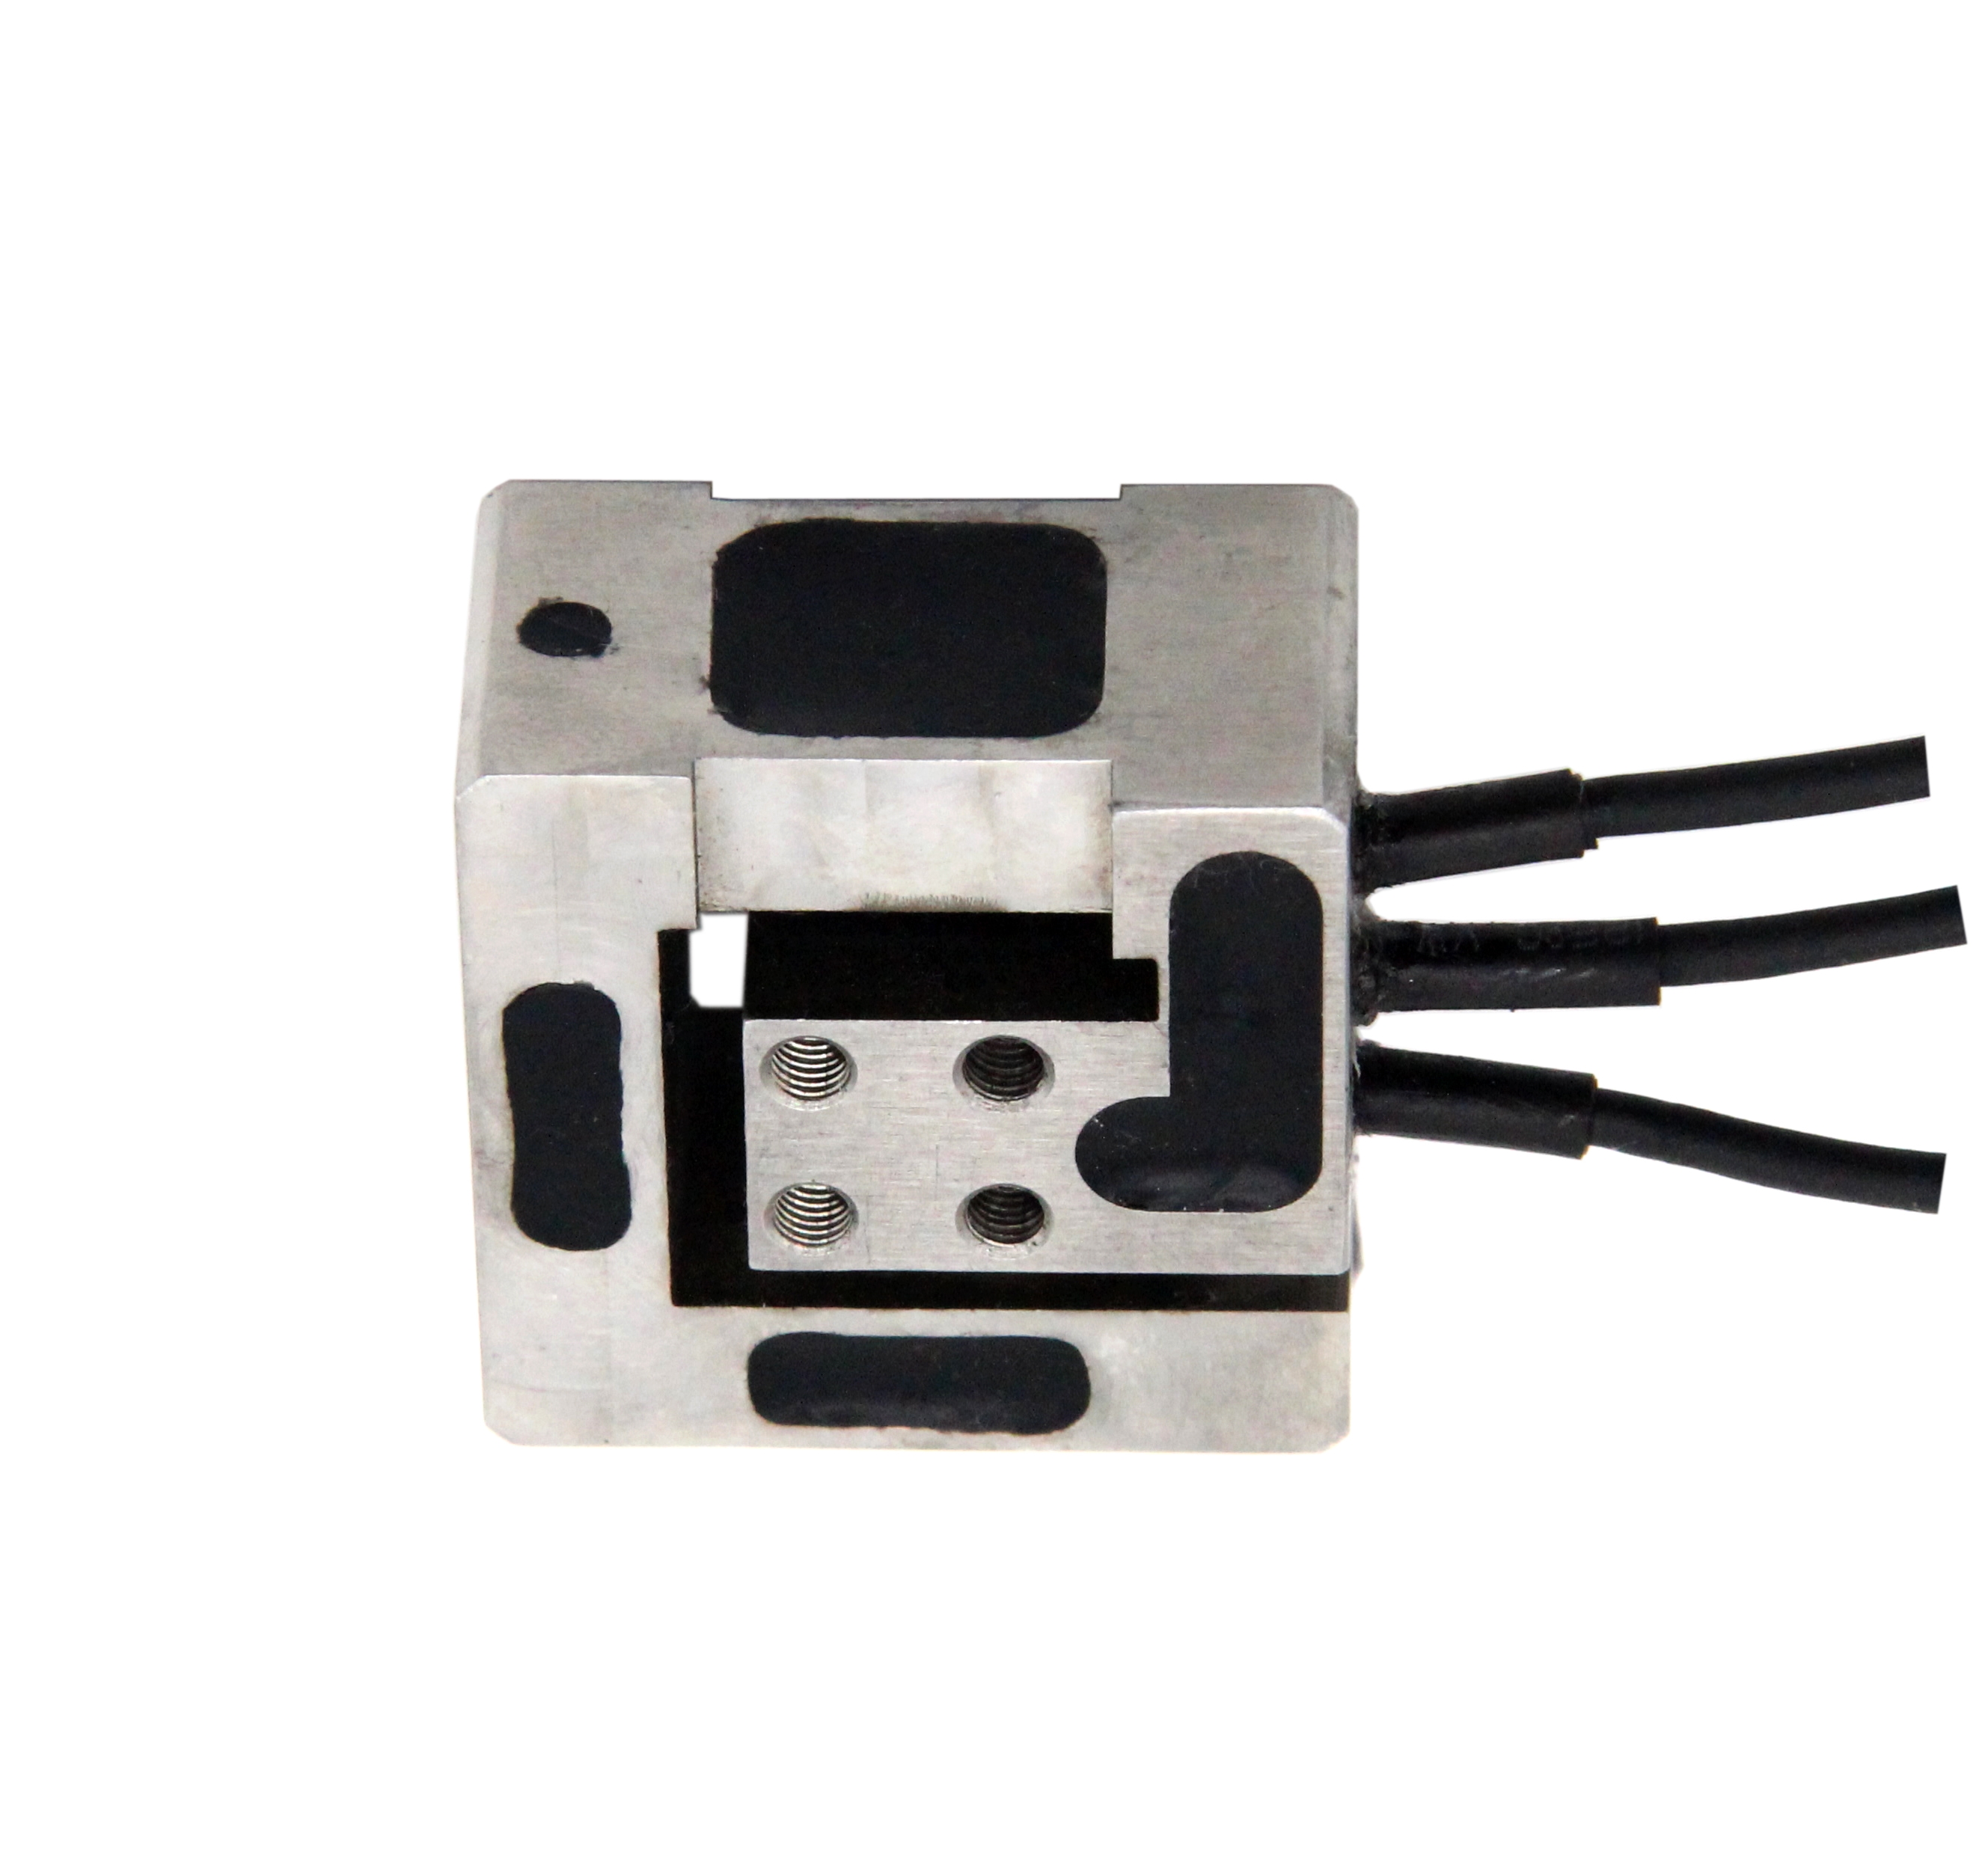 LCX3014 Multi Component Load Cells Multi-dimensional Force Sensor Multi-Axis Load Cell